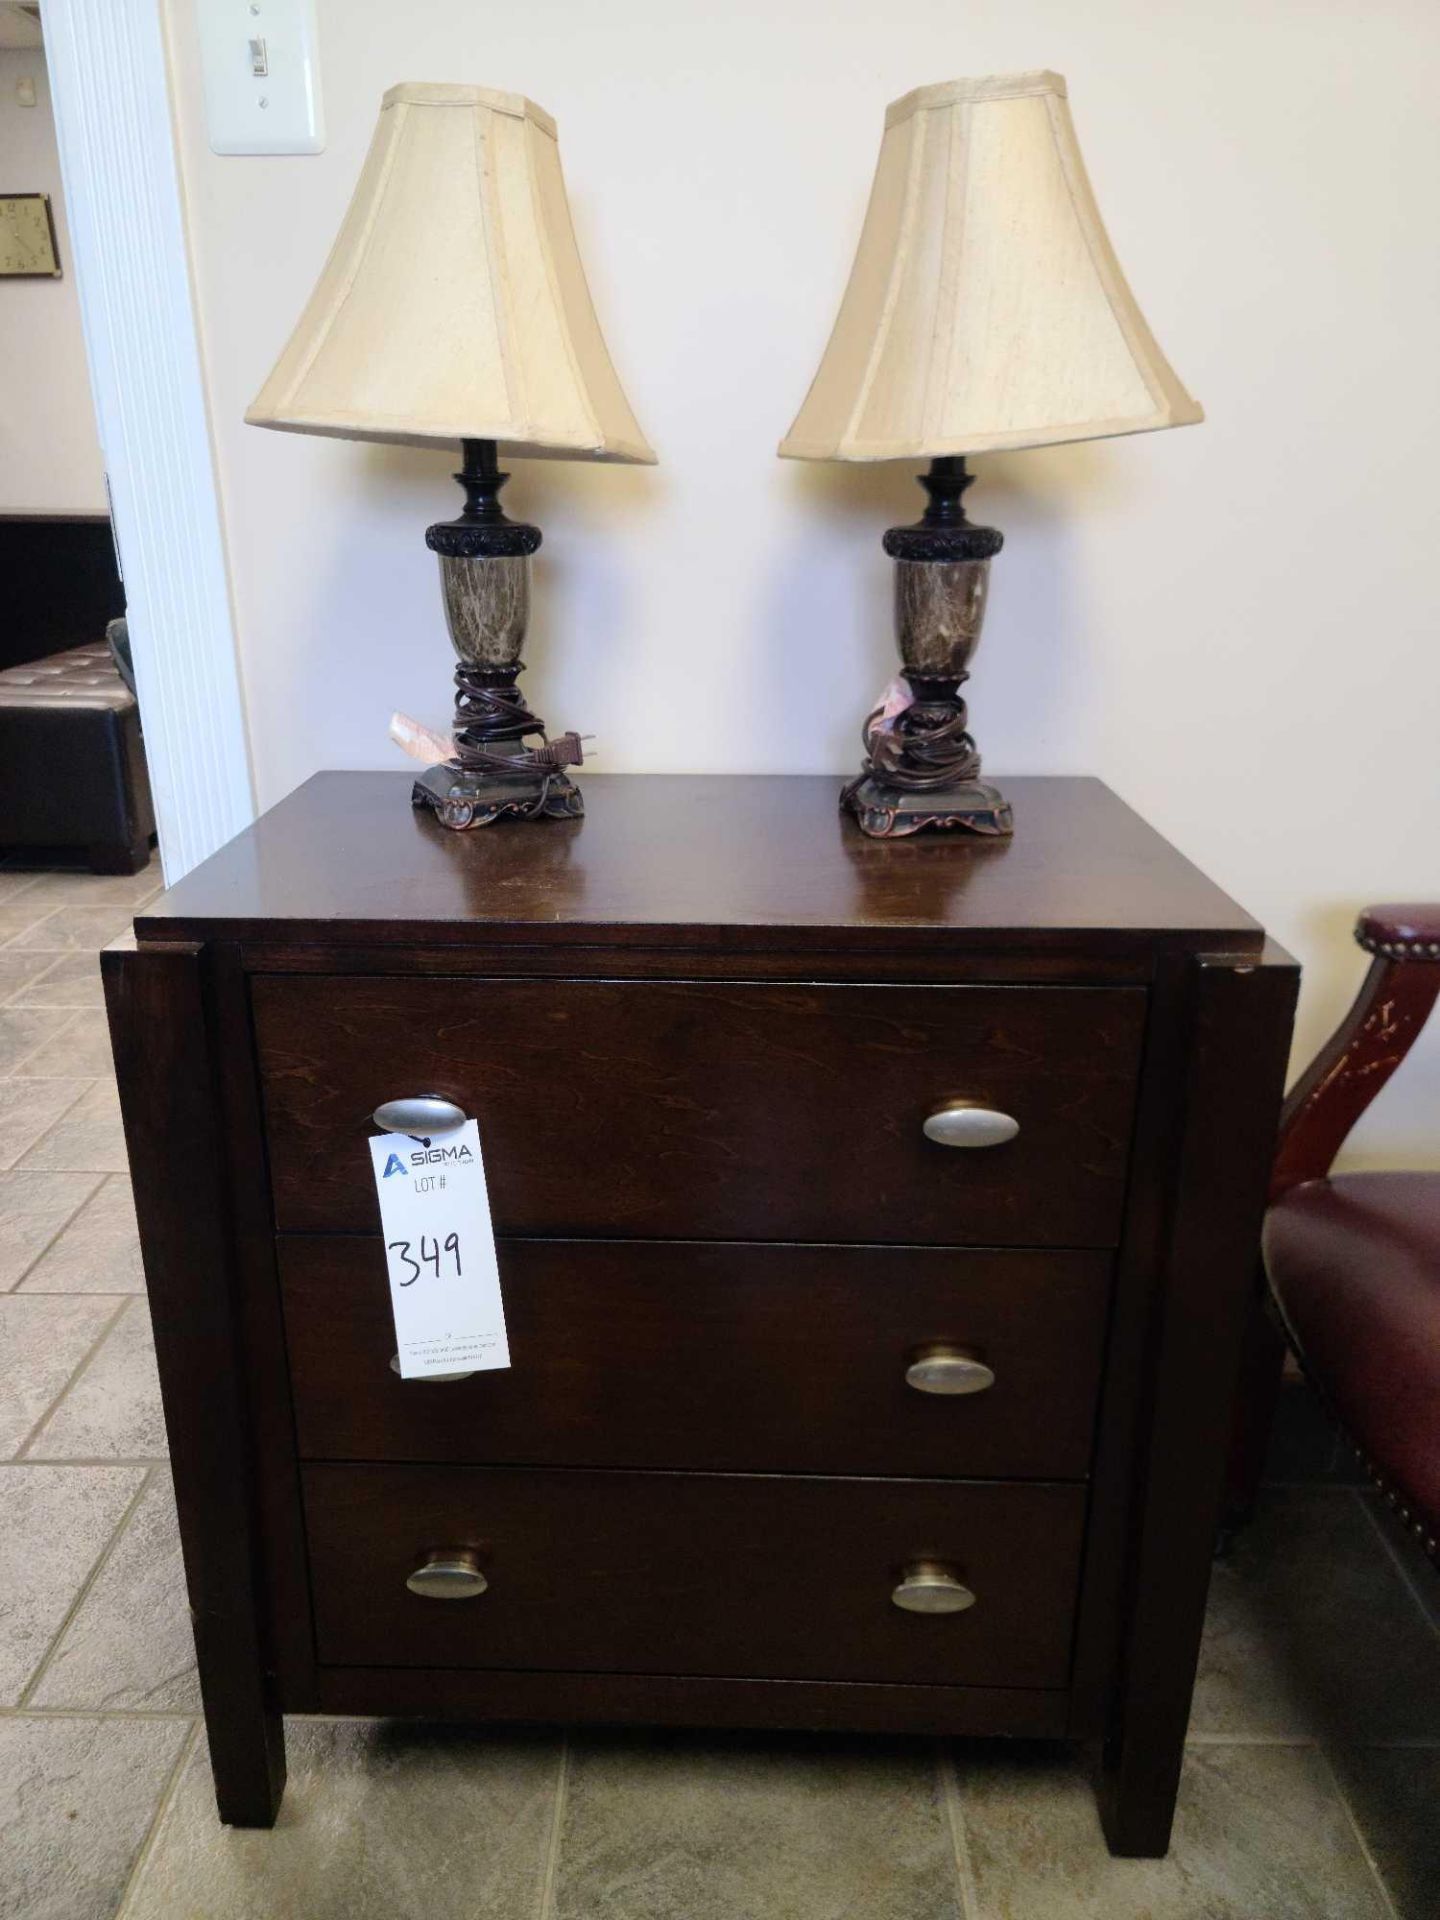 End Table and Lamps - Image 2 of 2